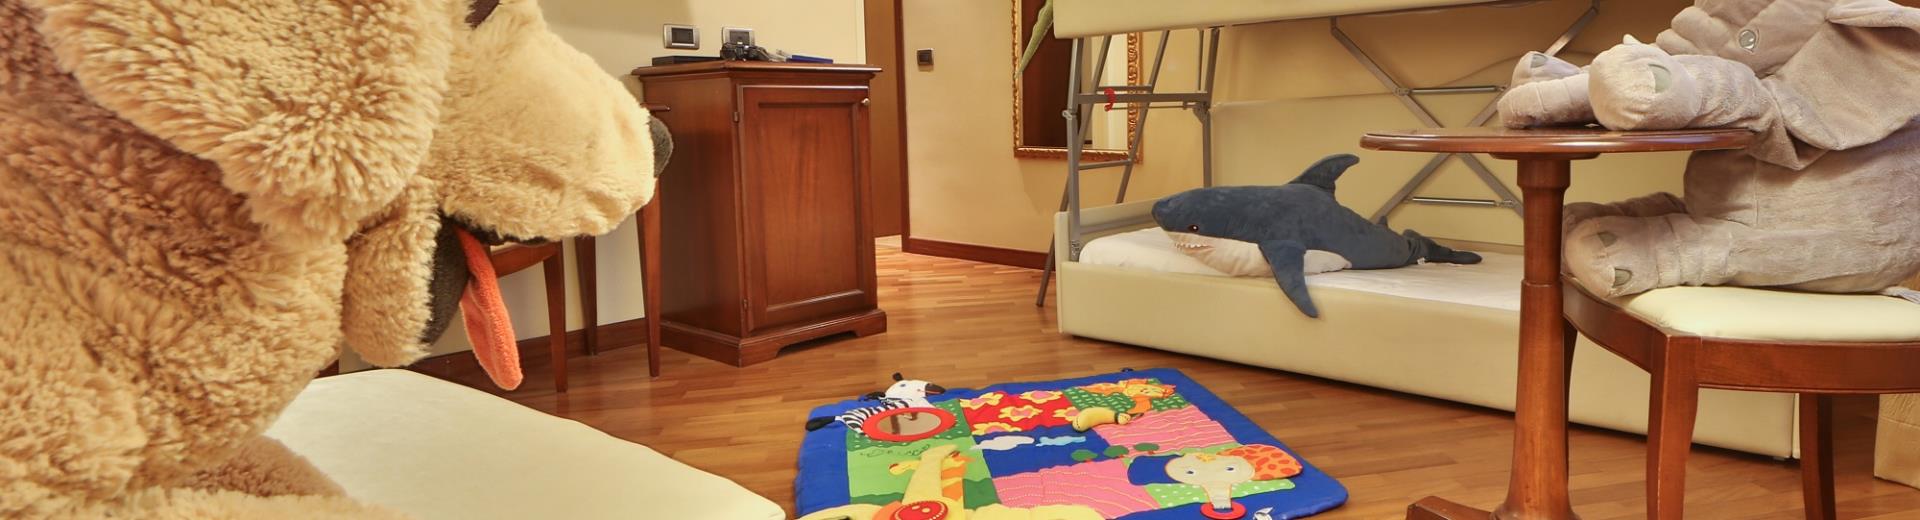 Family room suitable for families with children at the Hotel Metropoli in Genoa